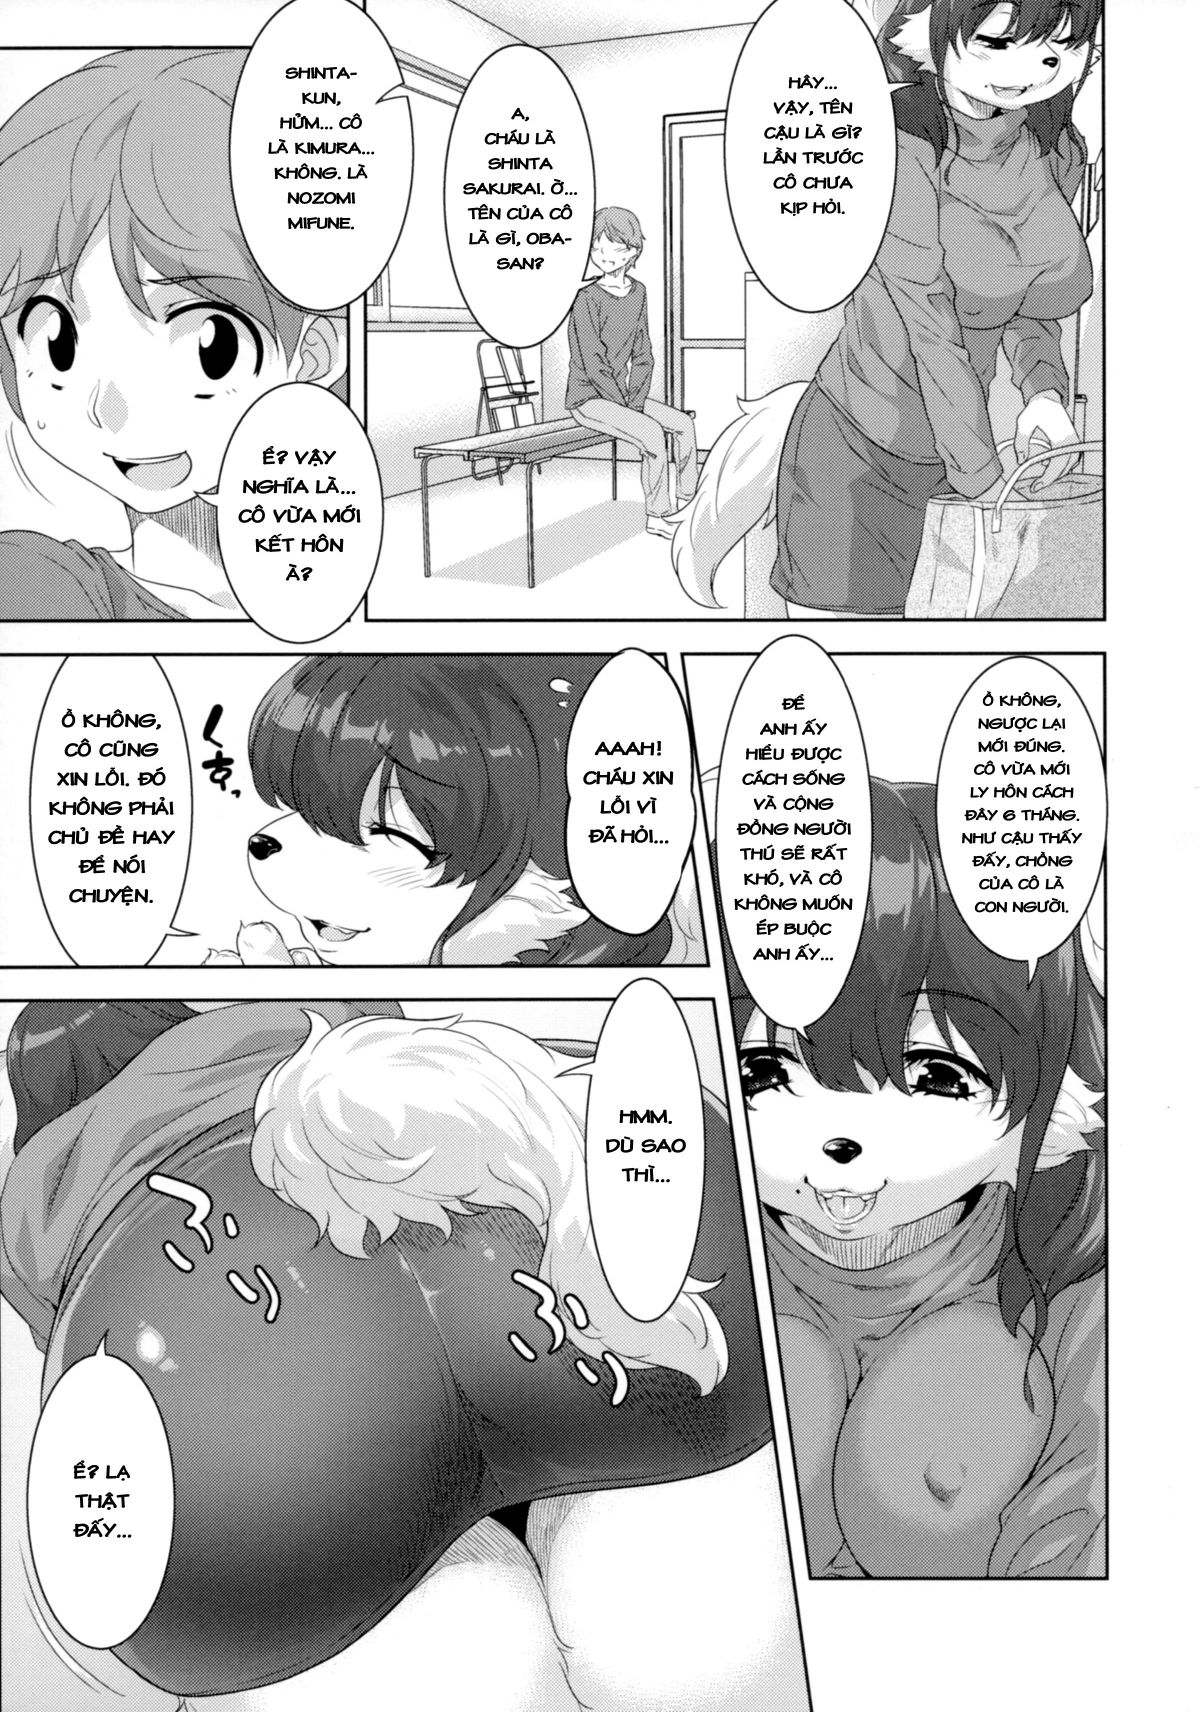 (C91) [GREONE (Nme)] Laundry no Sono [Vietnamese Tiếng Việt] [Furry Break the 4th Wall] 11